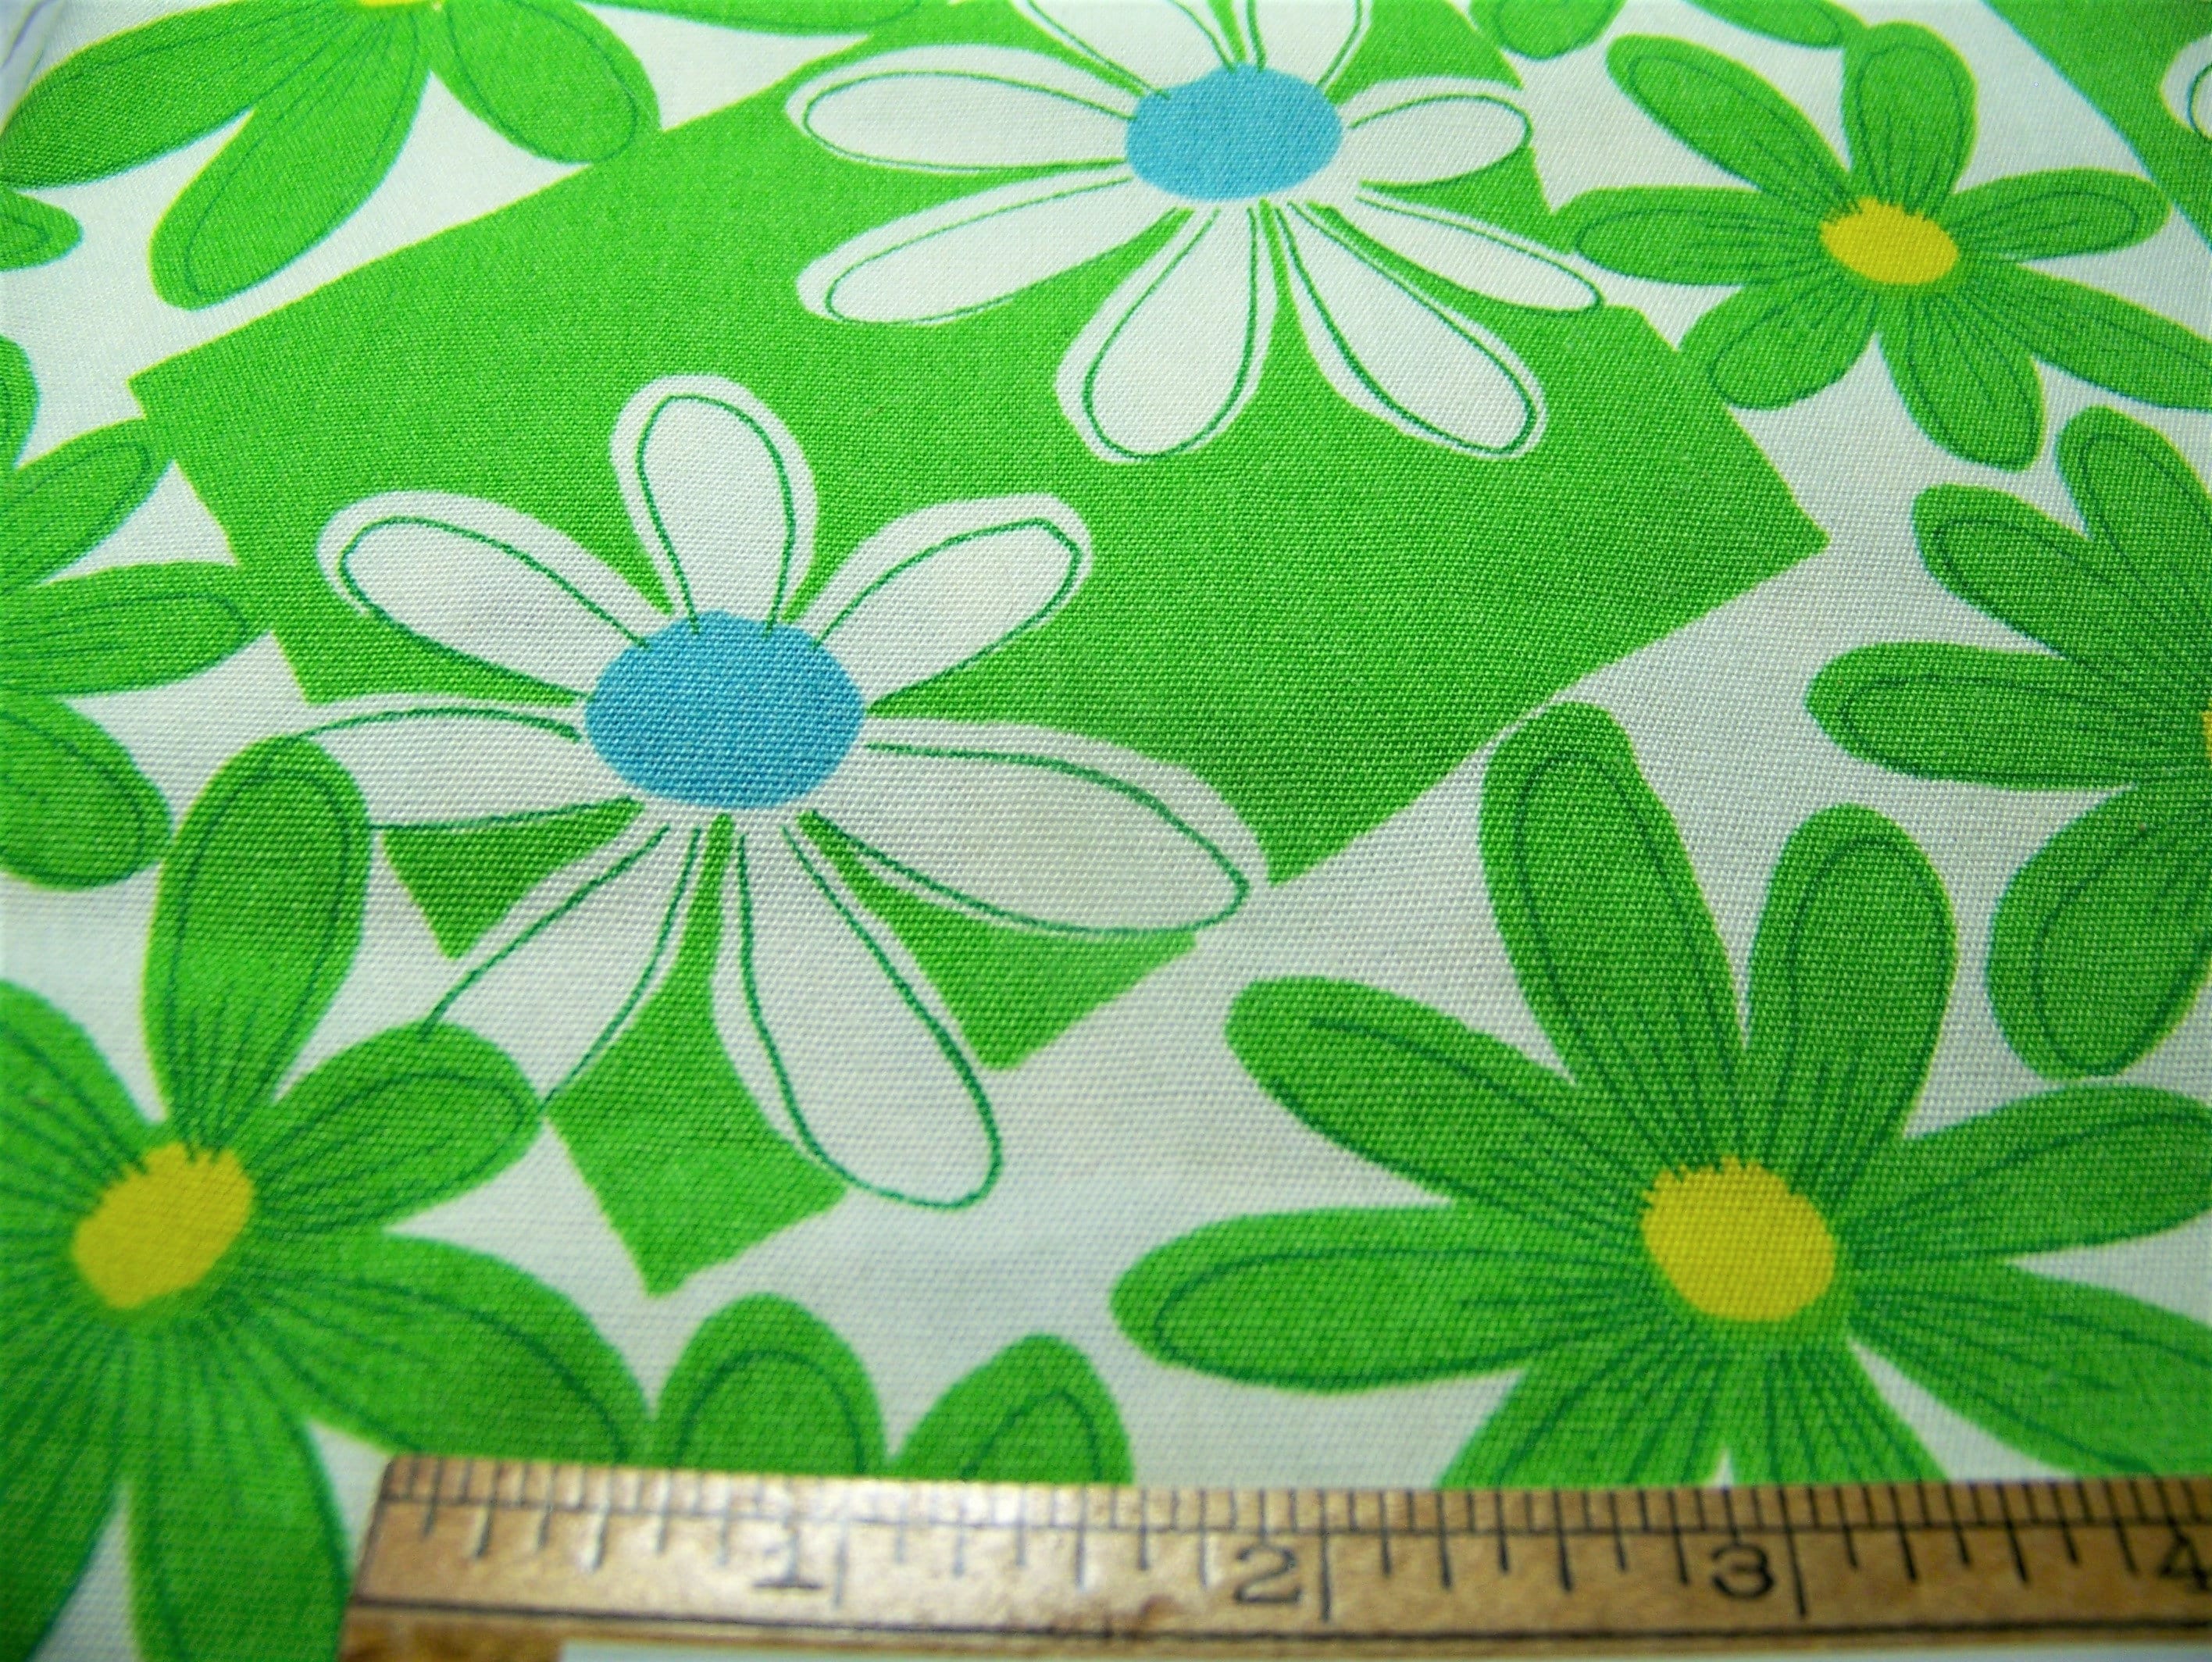 Vintage 1960's Cotton Blend Fabric Curtain Panel Mod Daisies Green Blue Yellow White 65 Wide By 80 Long Quilting Sewing Decorating Invbl"